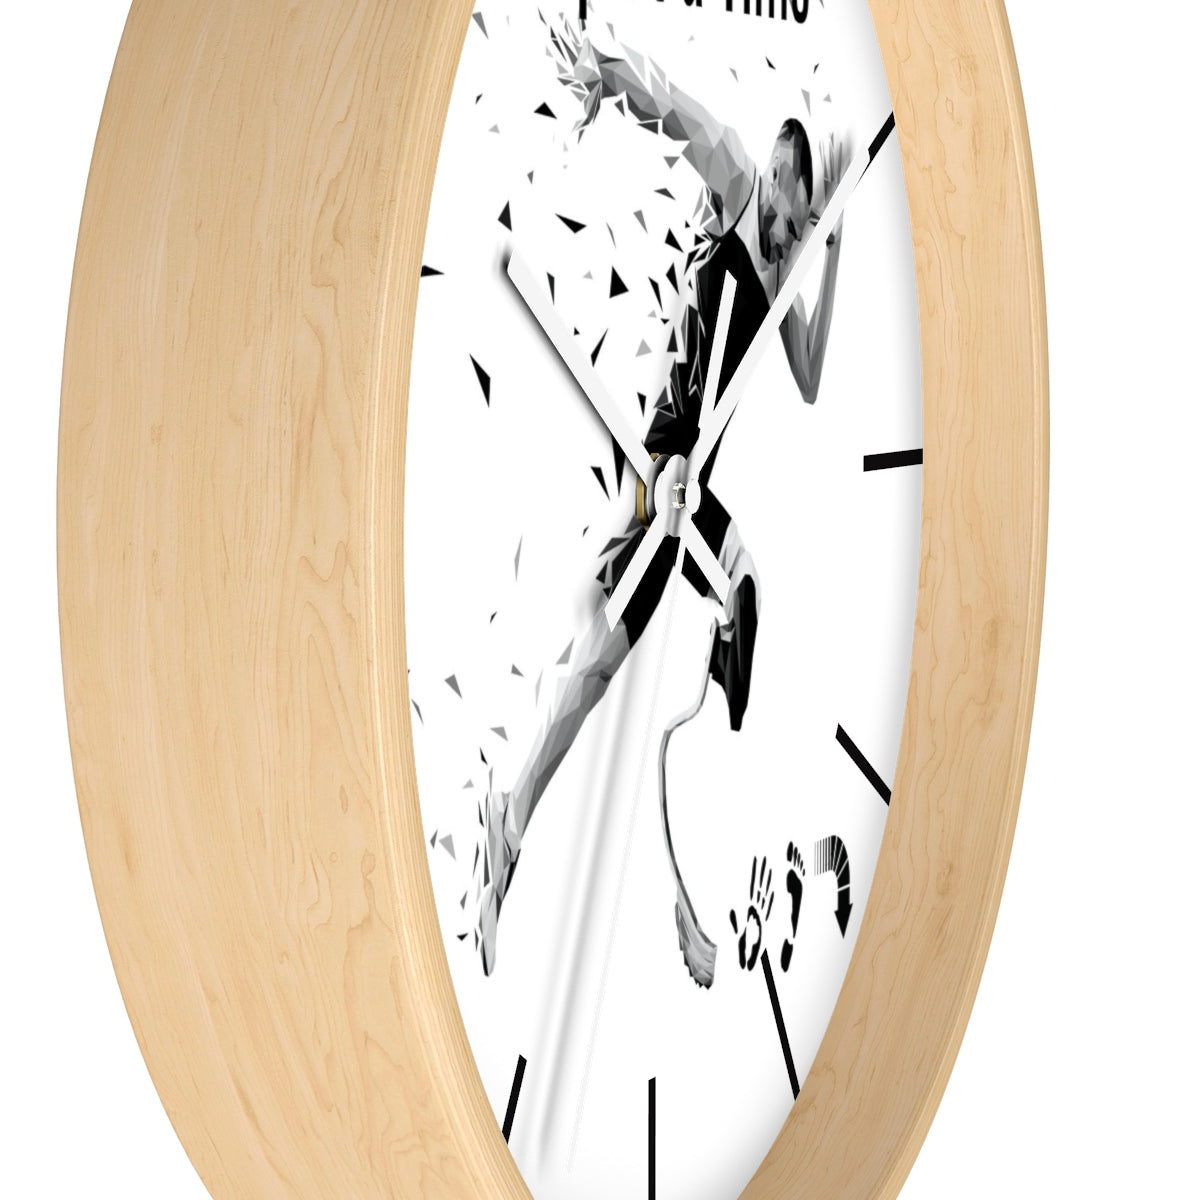 Five Toes Down 1 Step Wall clock